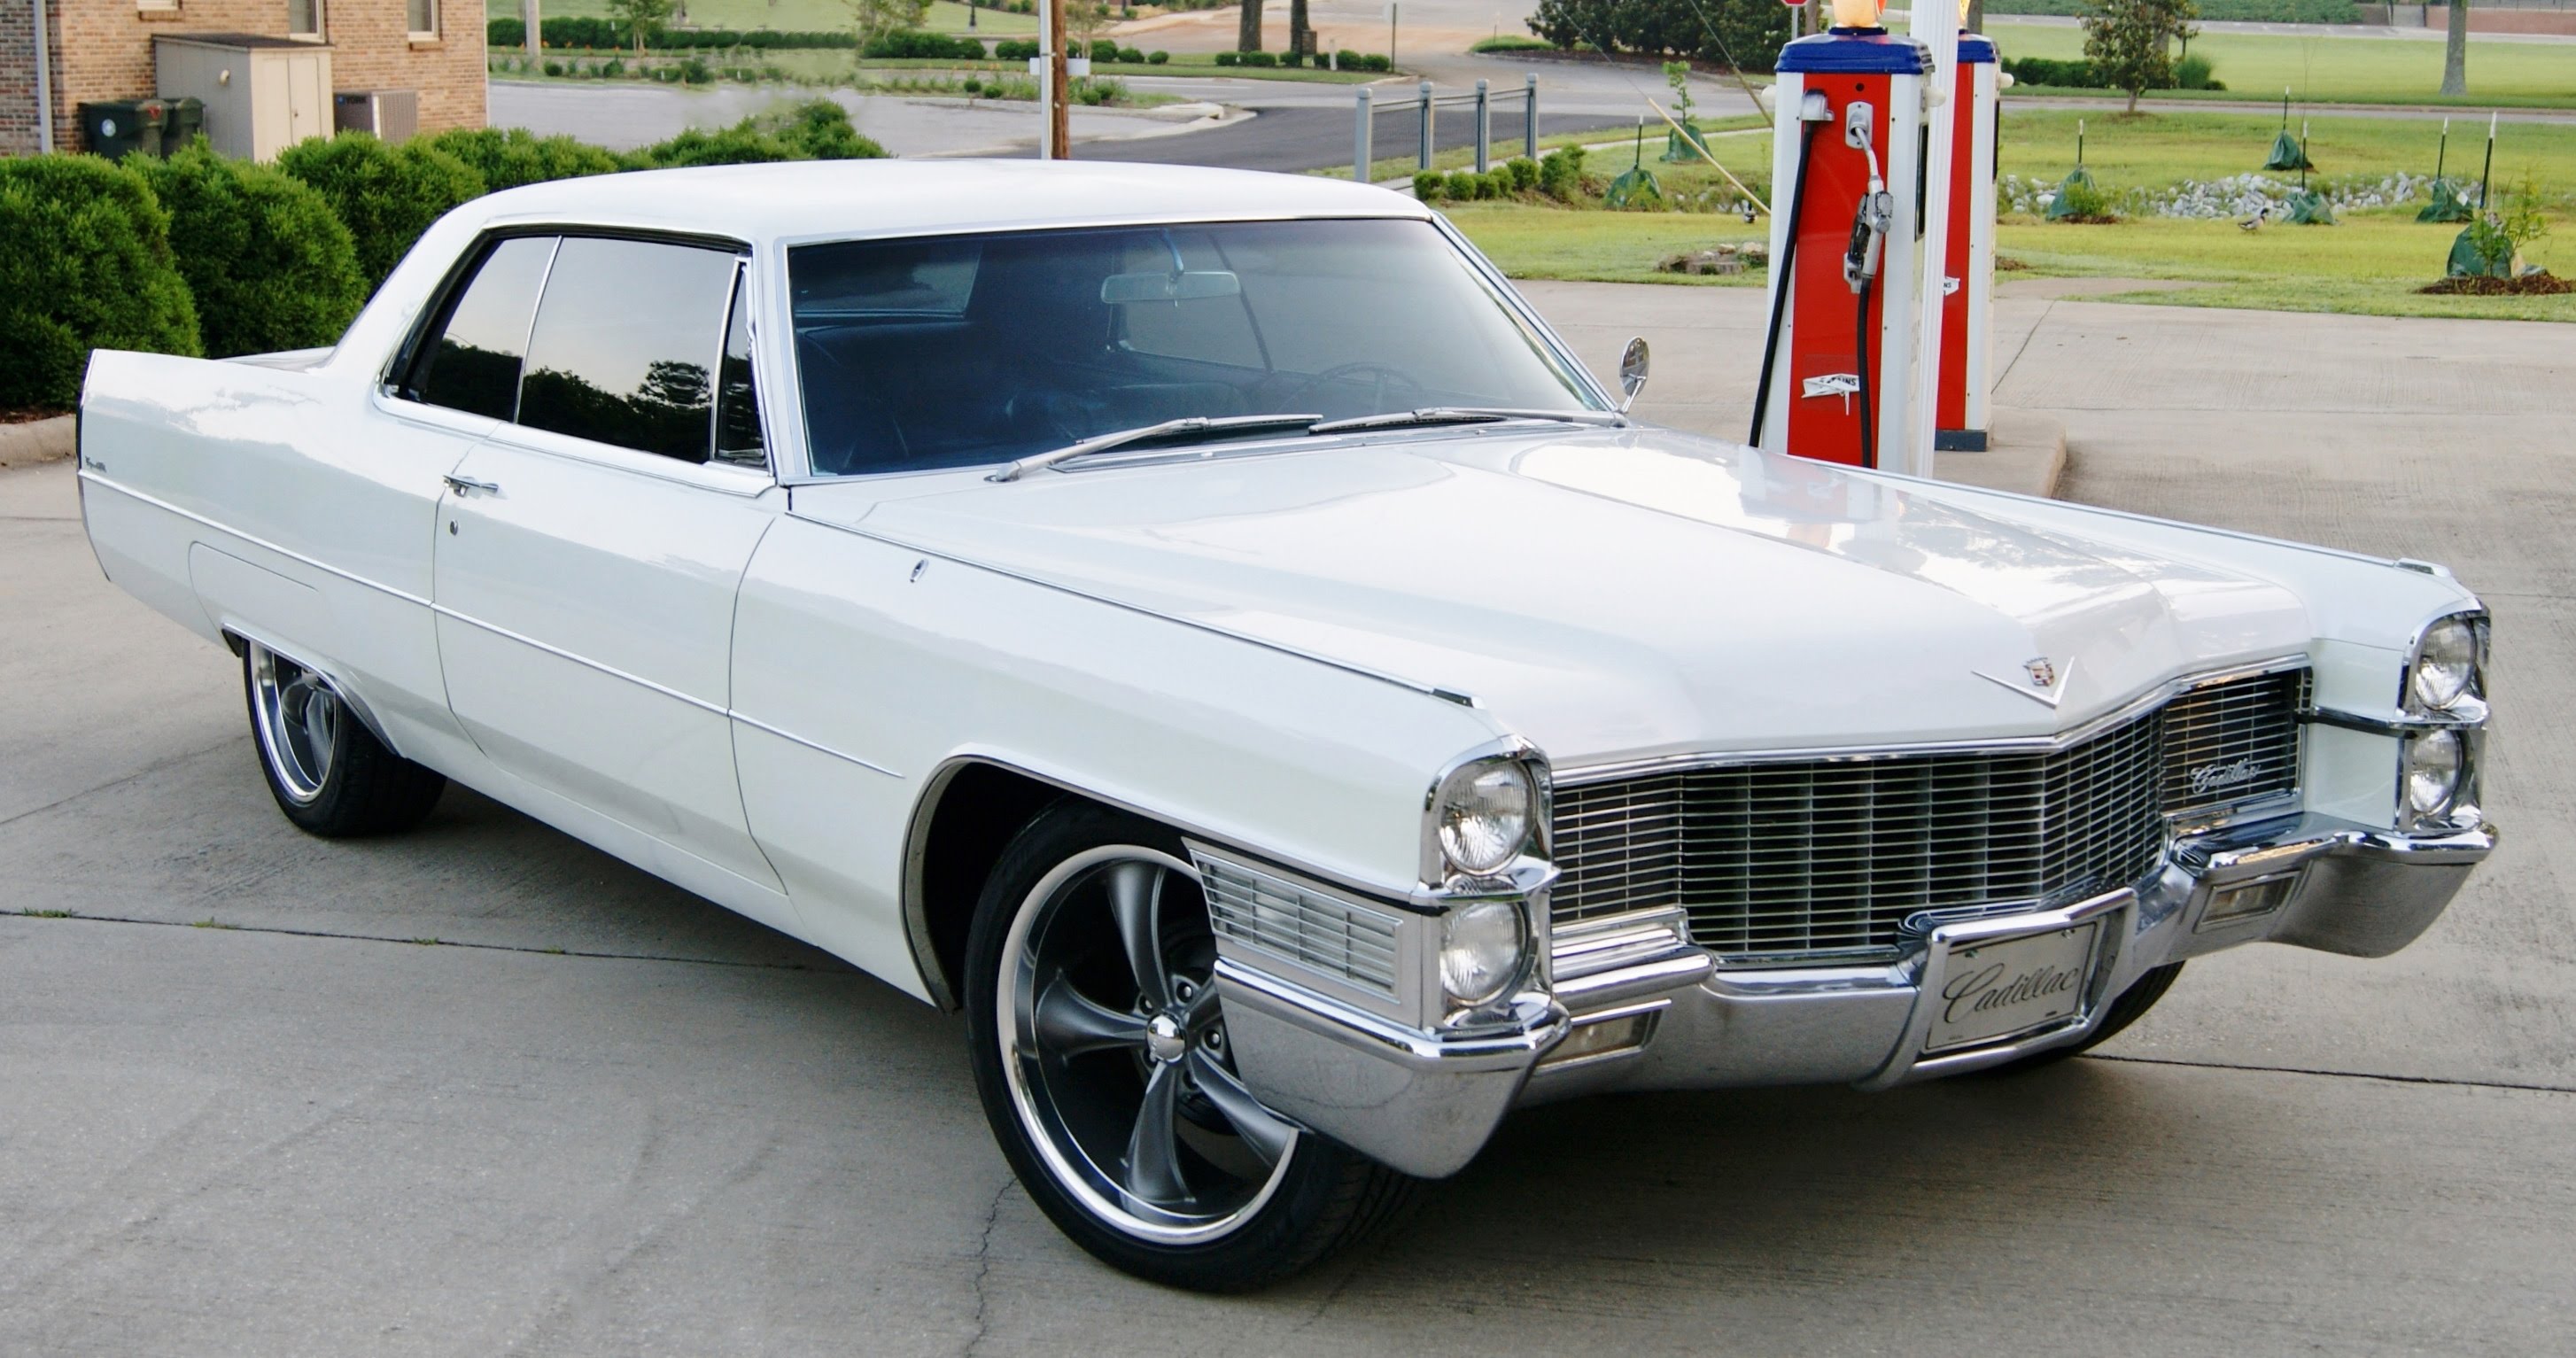 Nice Images Collection: Cadillac Coupe DeVille Desktop Wallpapers